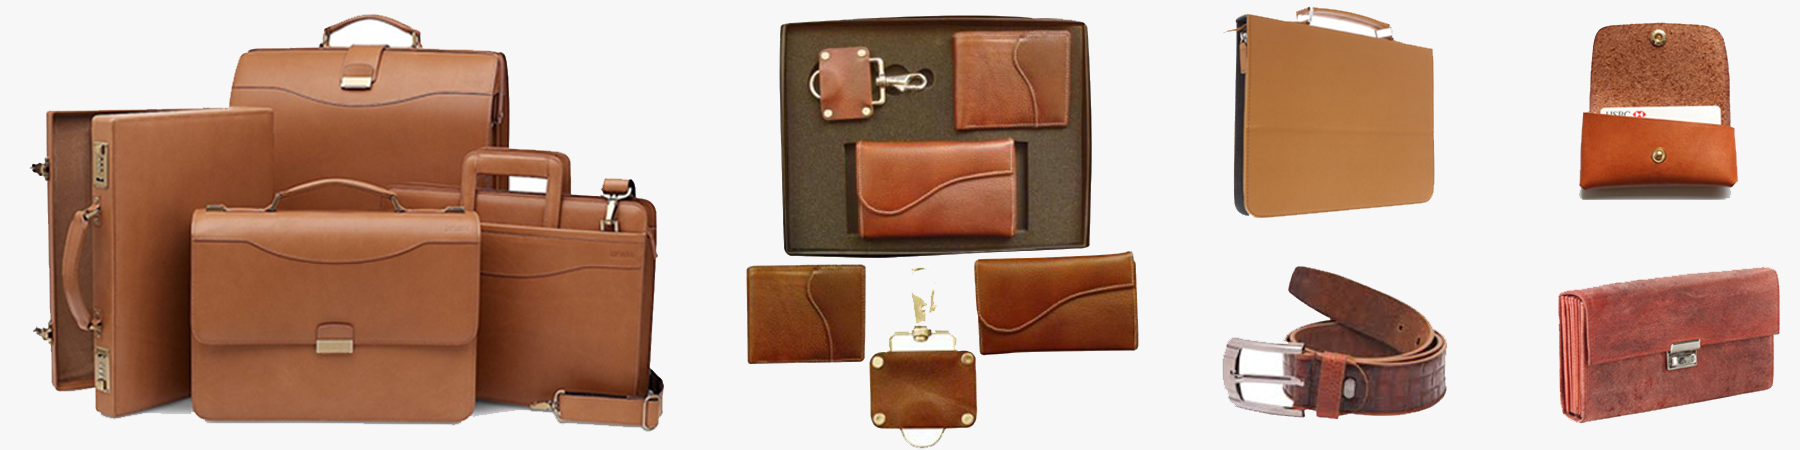 Leather Items For Corporate Gifts - Steel Horse Leather Co.